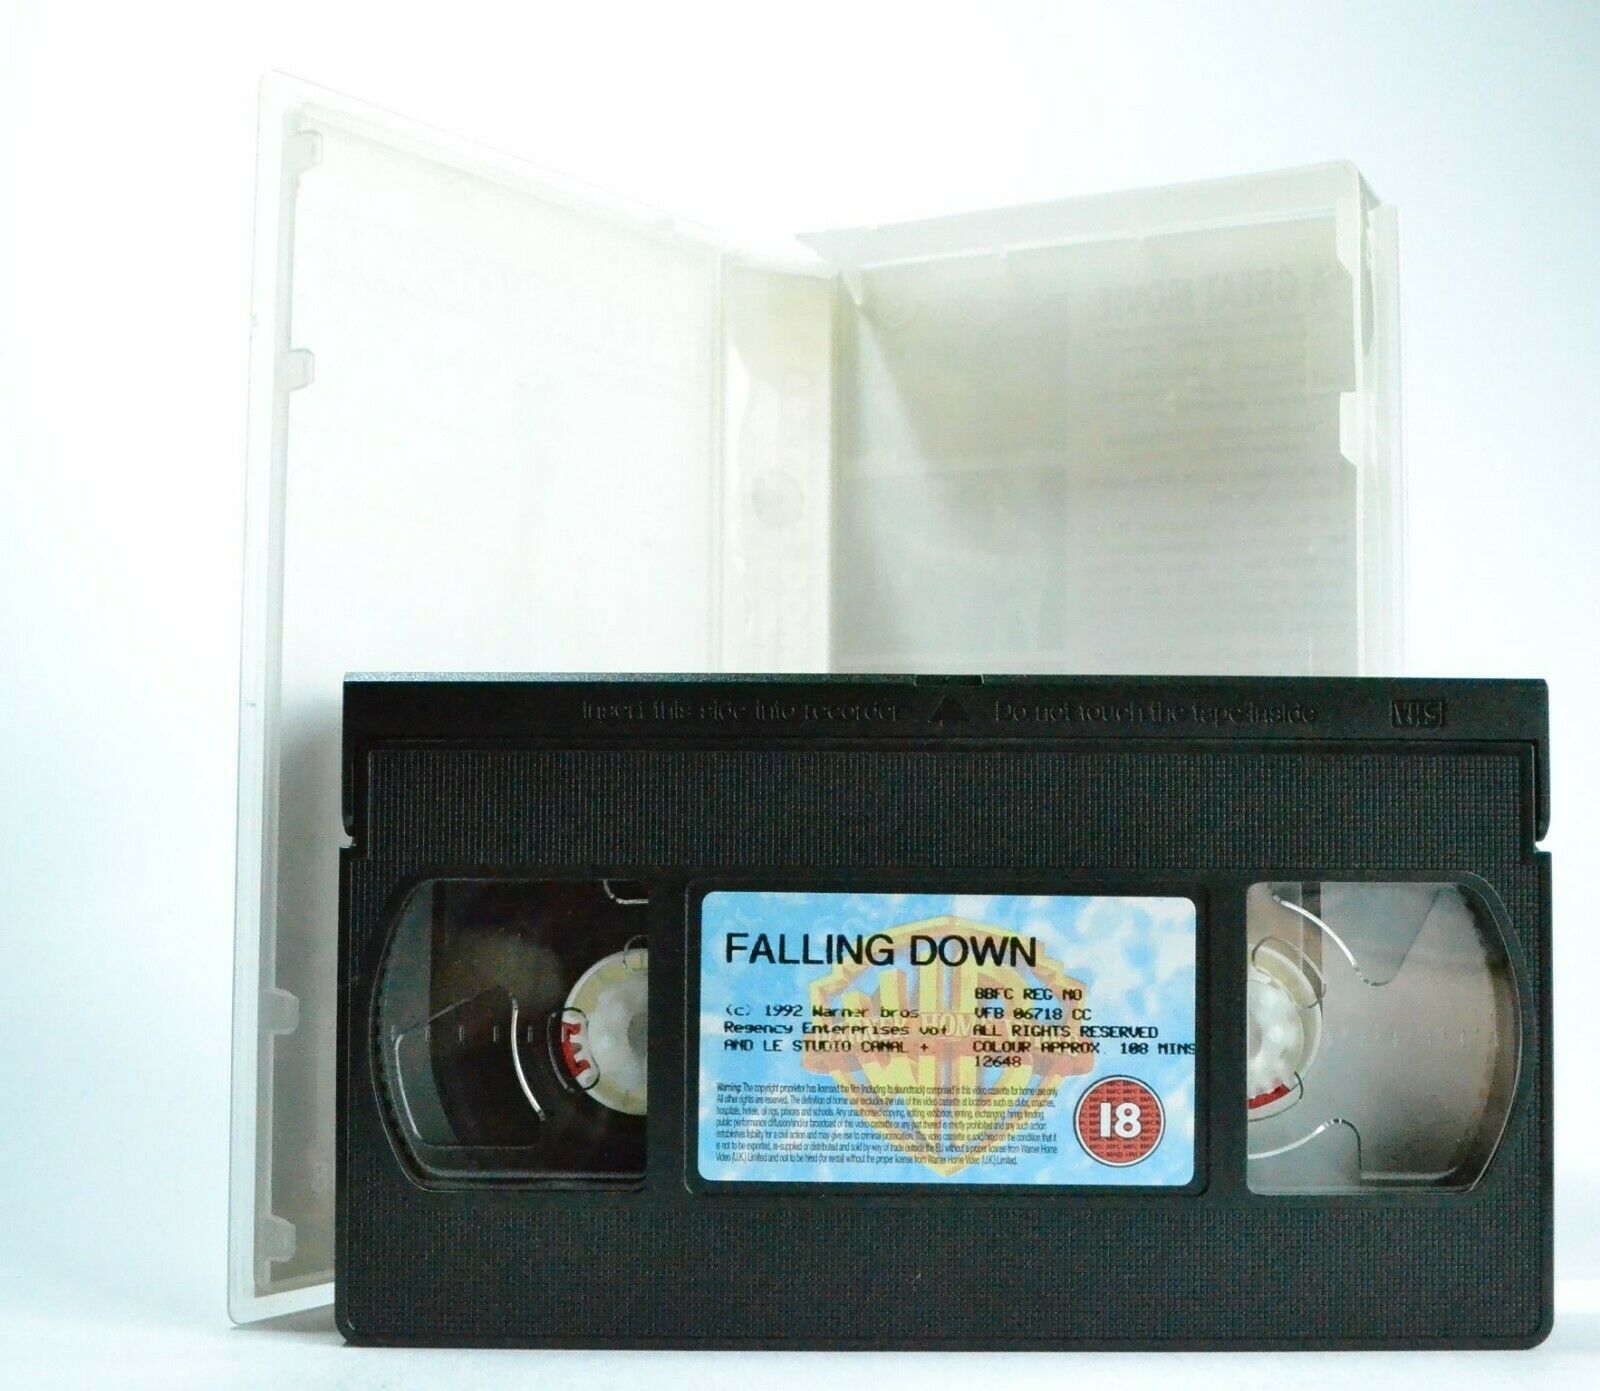 Falling Down (1993): A Tale Of Urban Reality - Thriller - Michael Douglas - VHS-